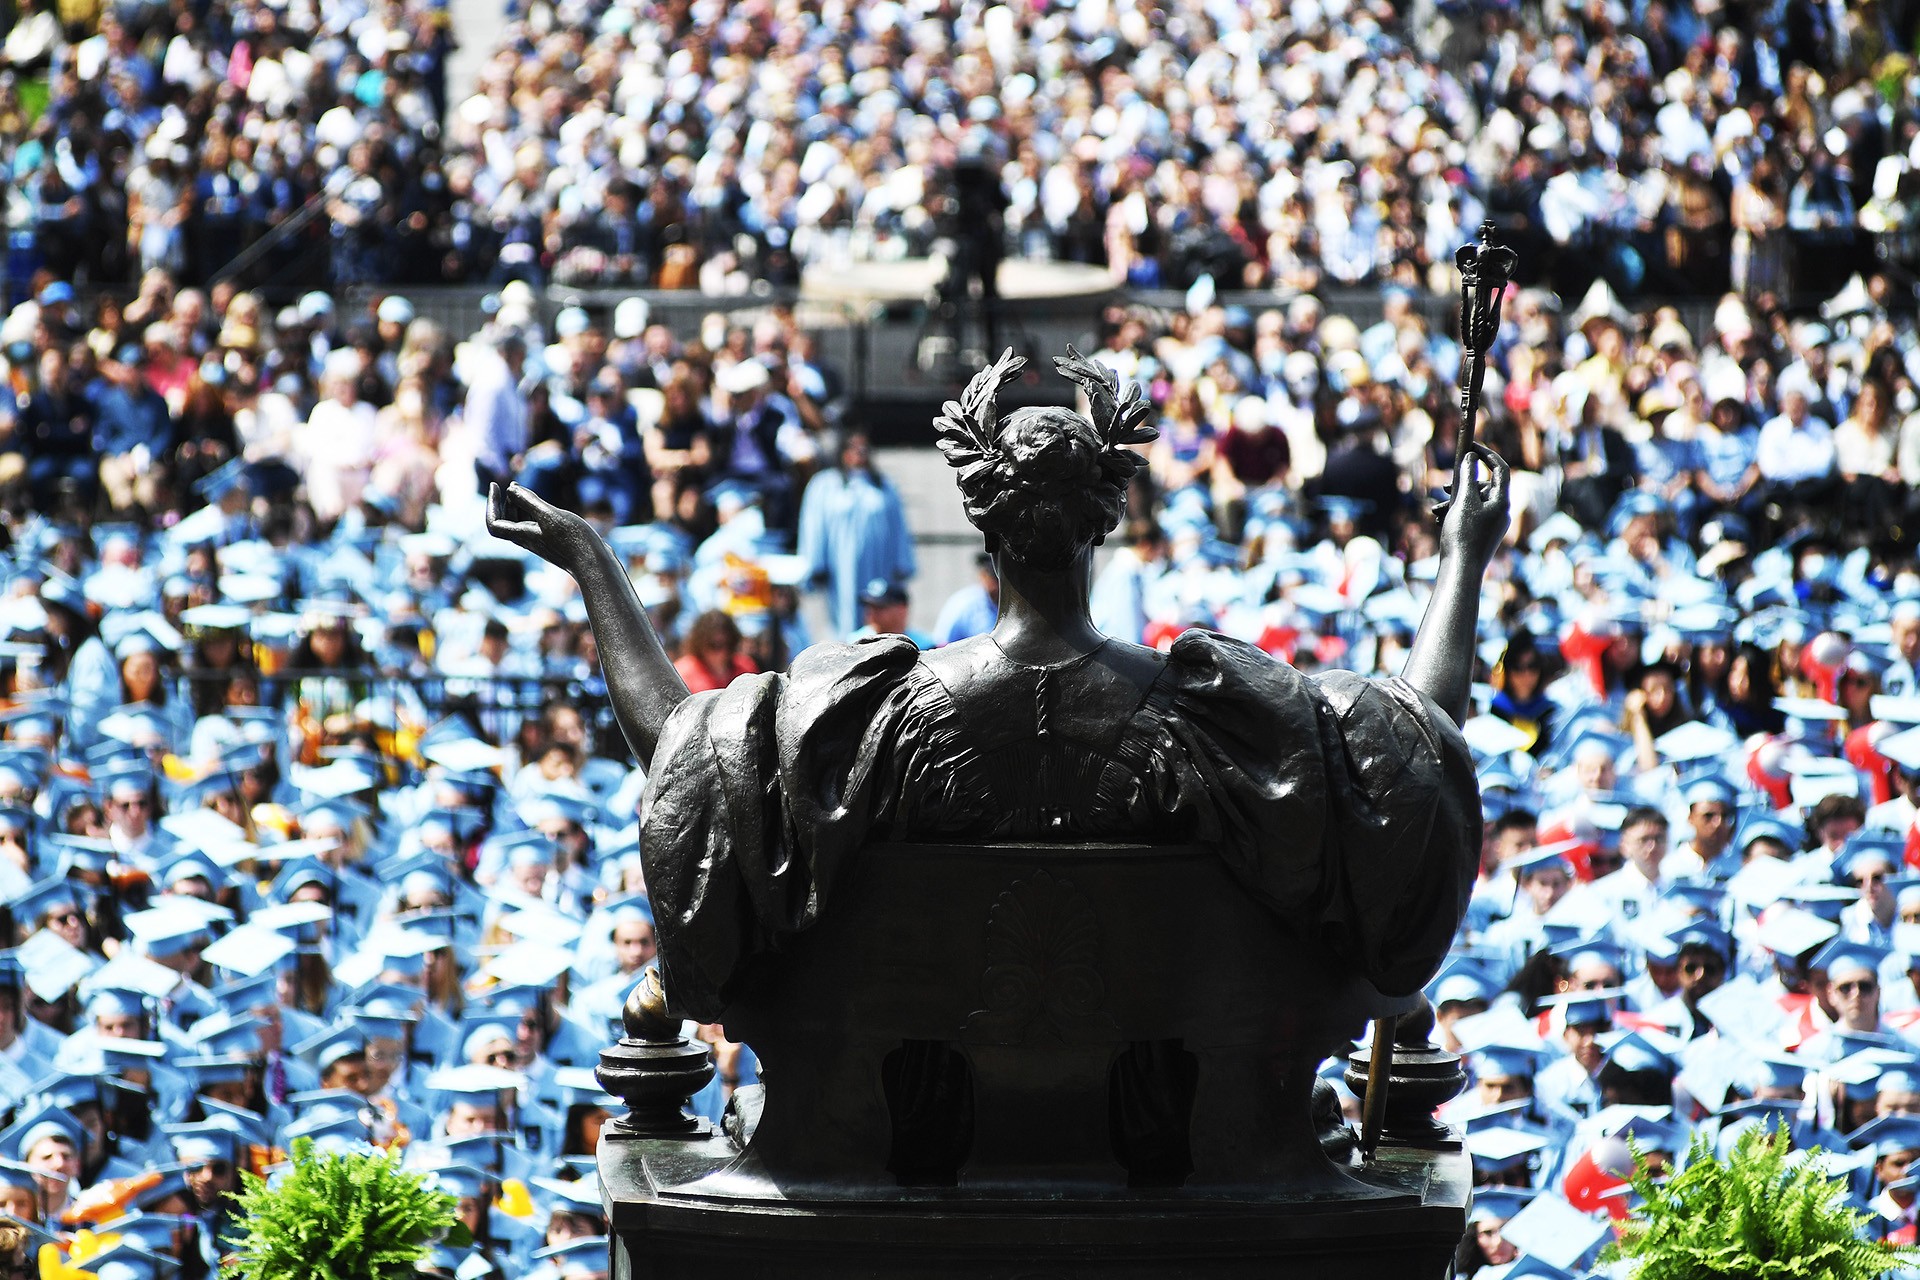 Photo taken of graduates at Commencement from behind the Alma Mater statue